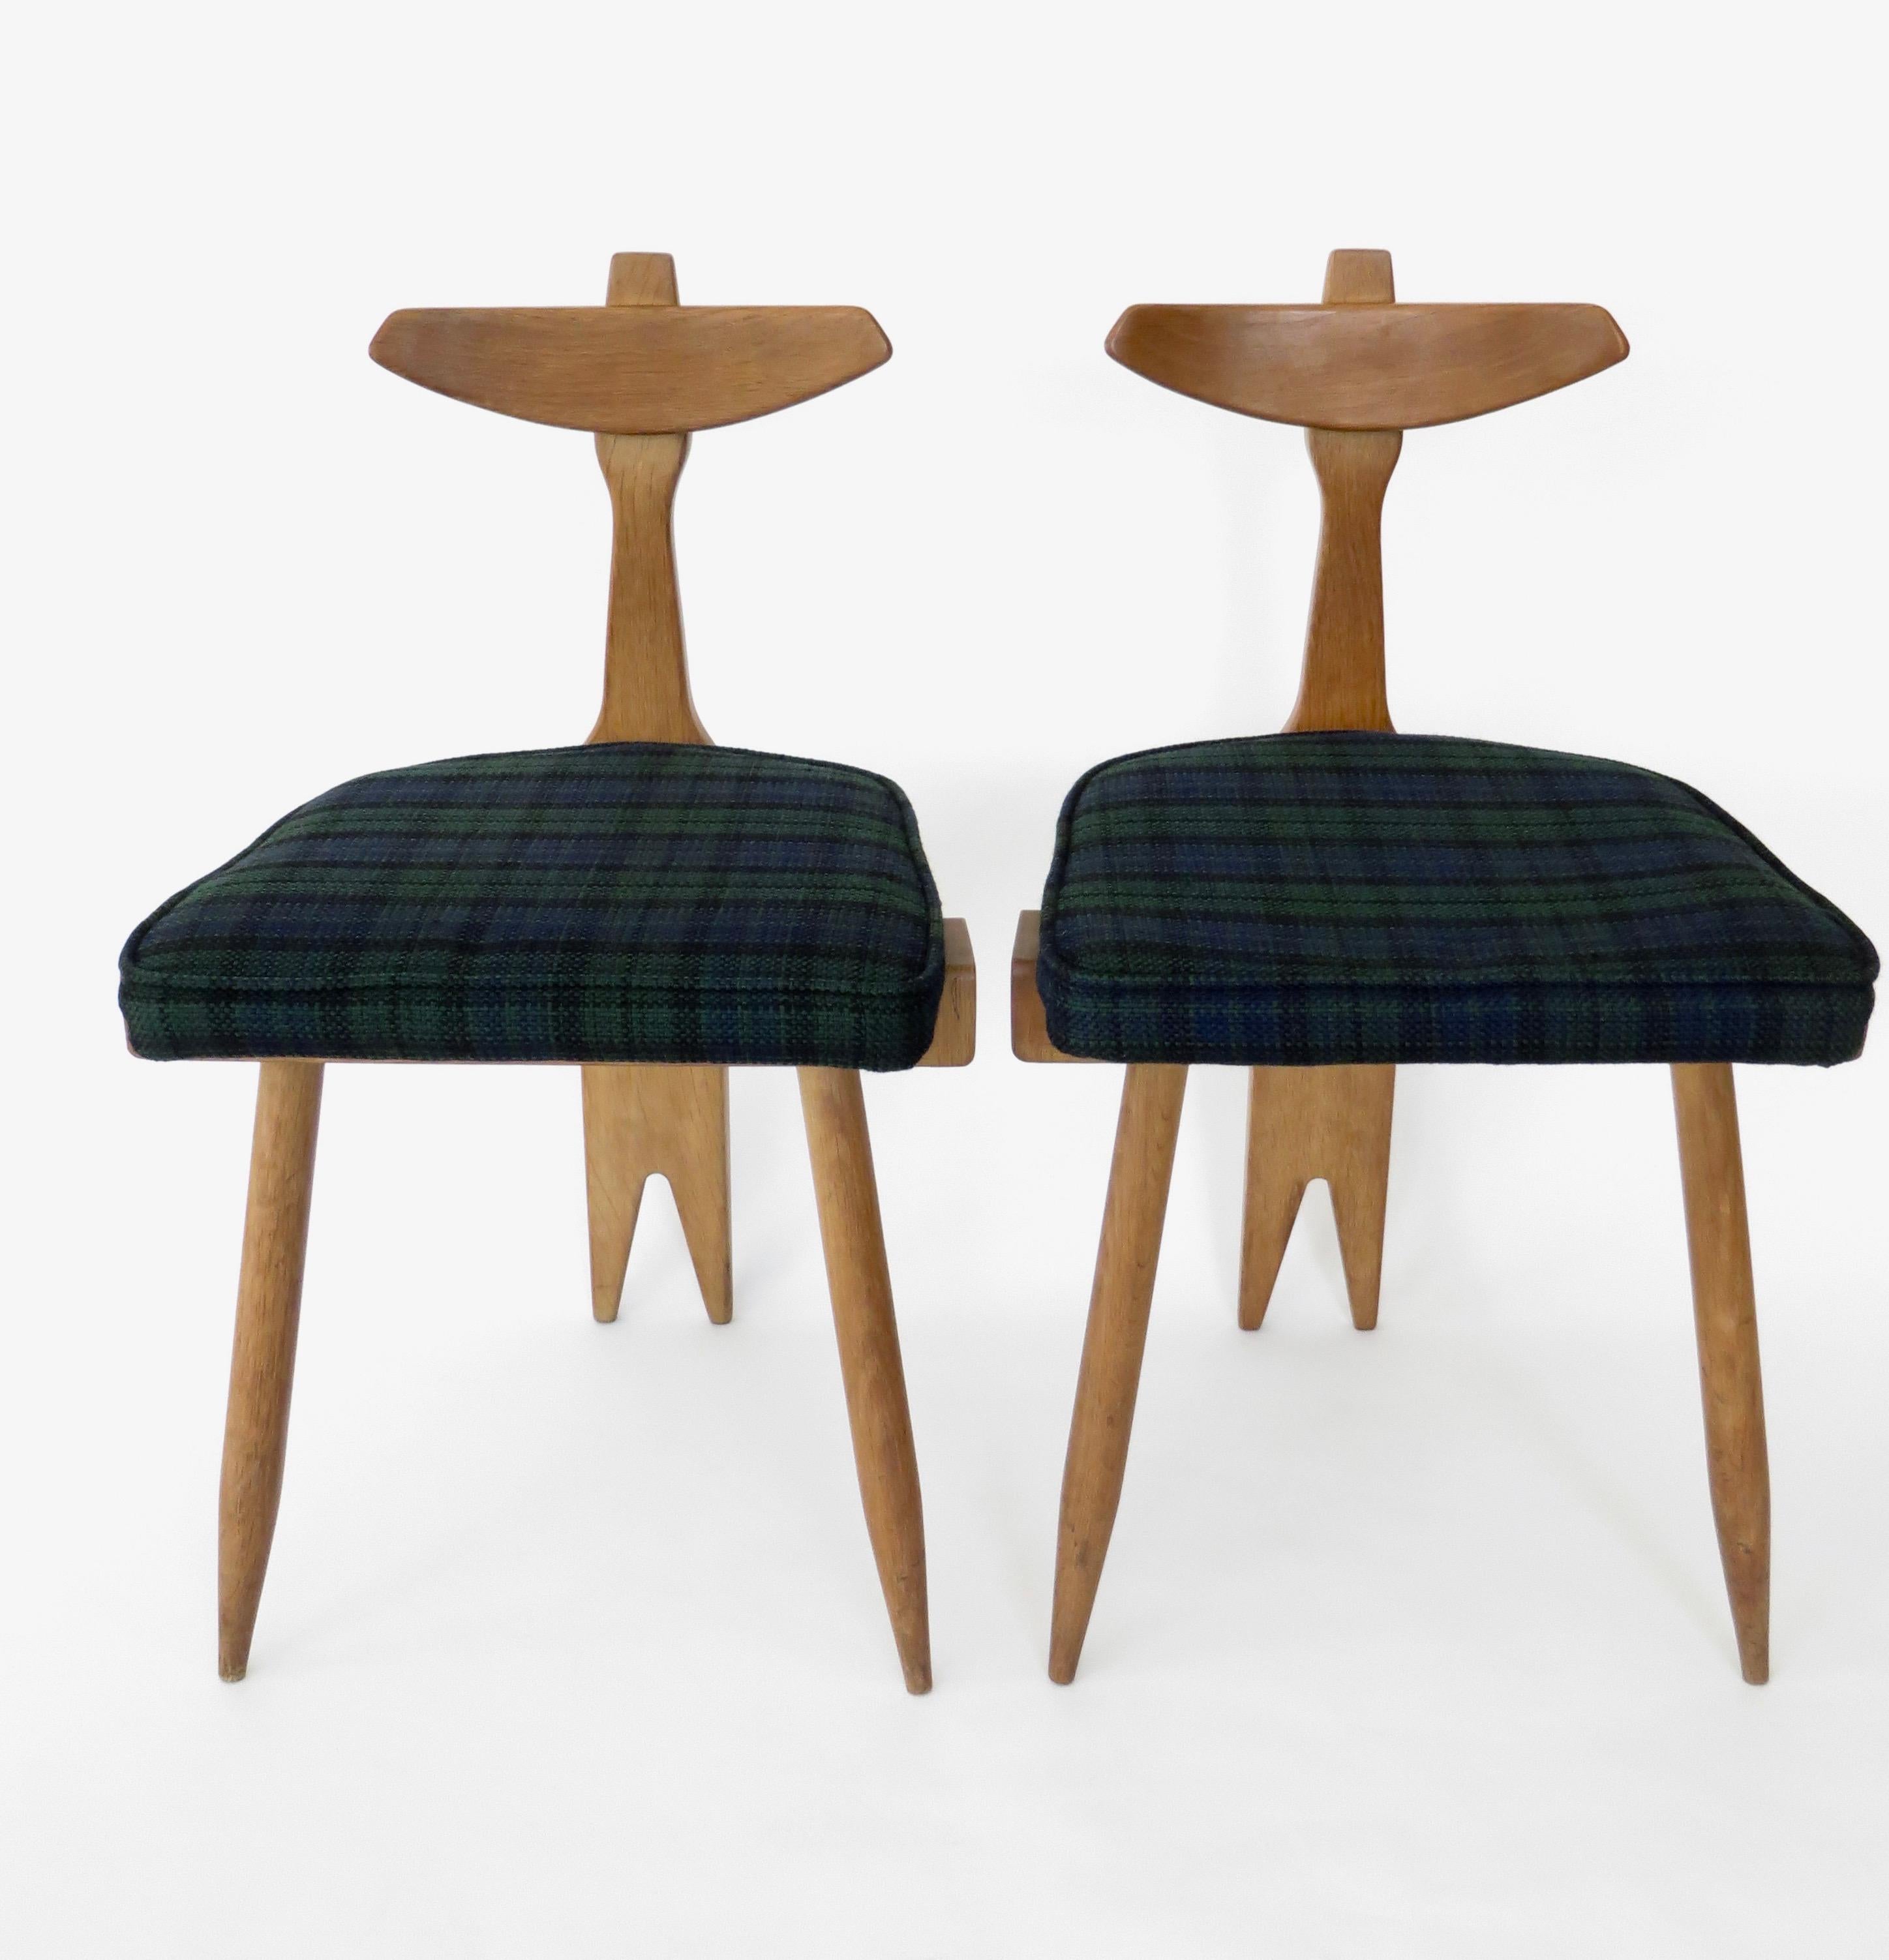 A pair of oak and fabric side or vanity tripod sculptural chairs by Guillerme et Chambron.
Influenced by African chairs and thrones.
French oak and original upholstered seat. Ready to use as is or a simple upholstery change.
The oak wood is in